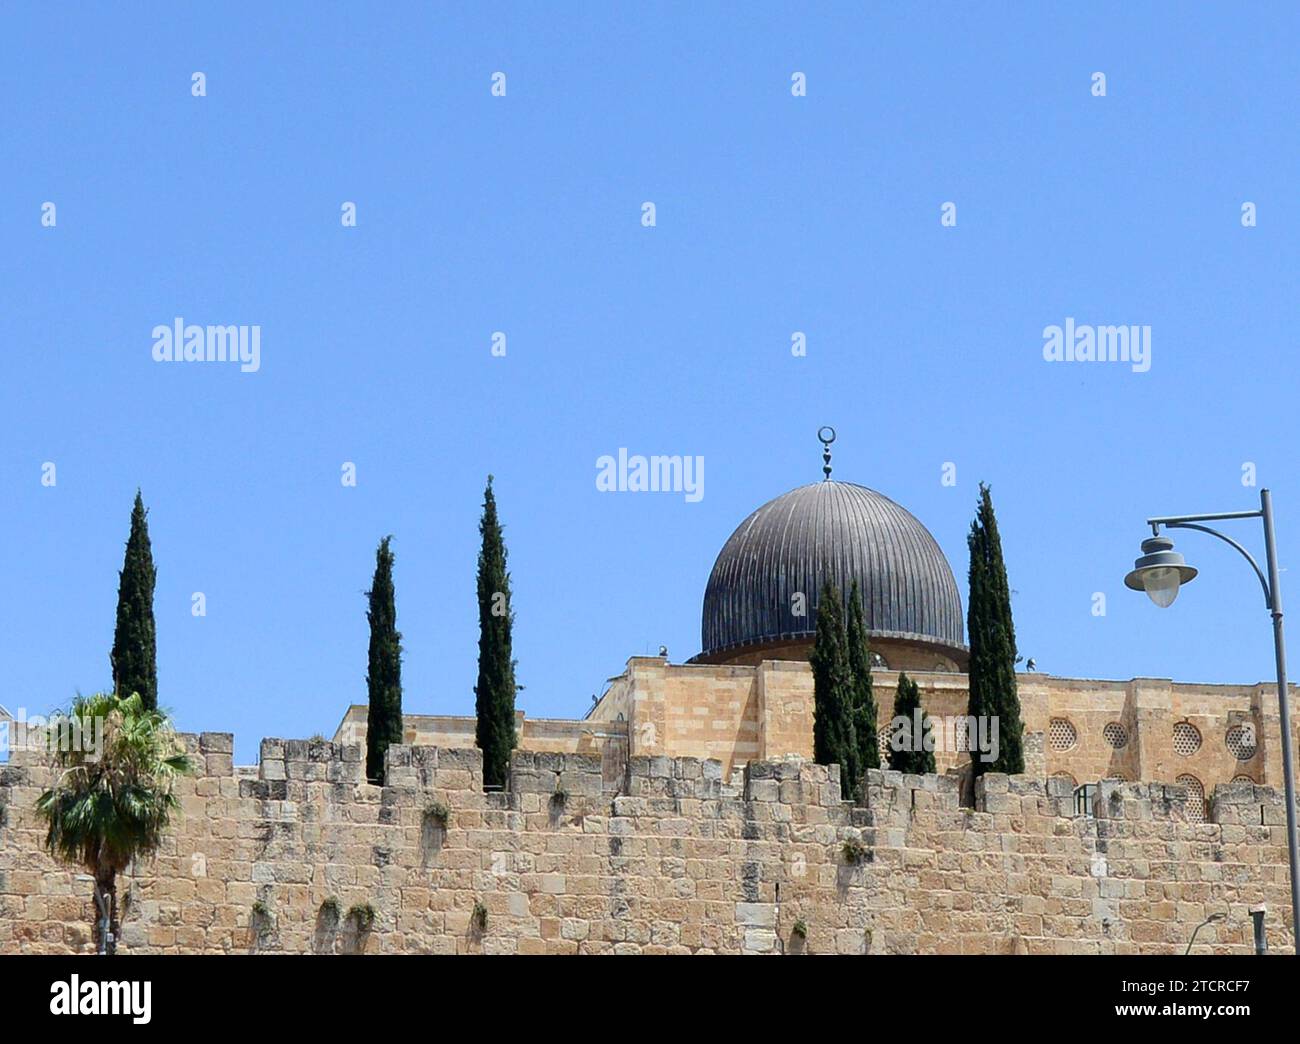 Al-Aqsa mosque in the old city of Jerusalem. Stock Photo